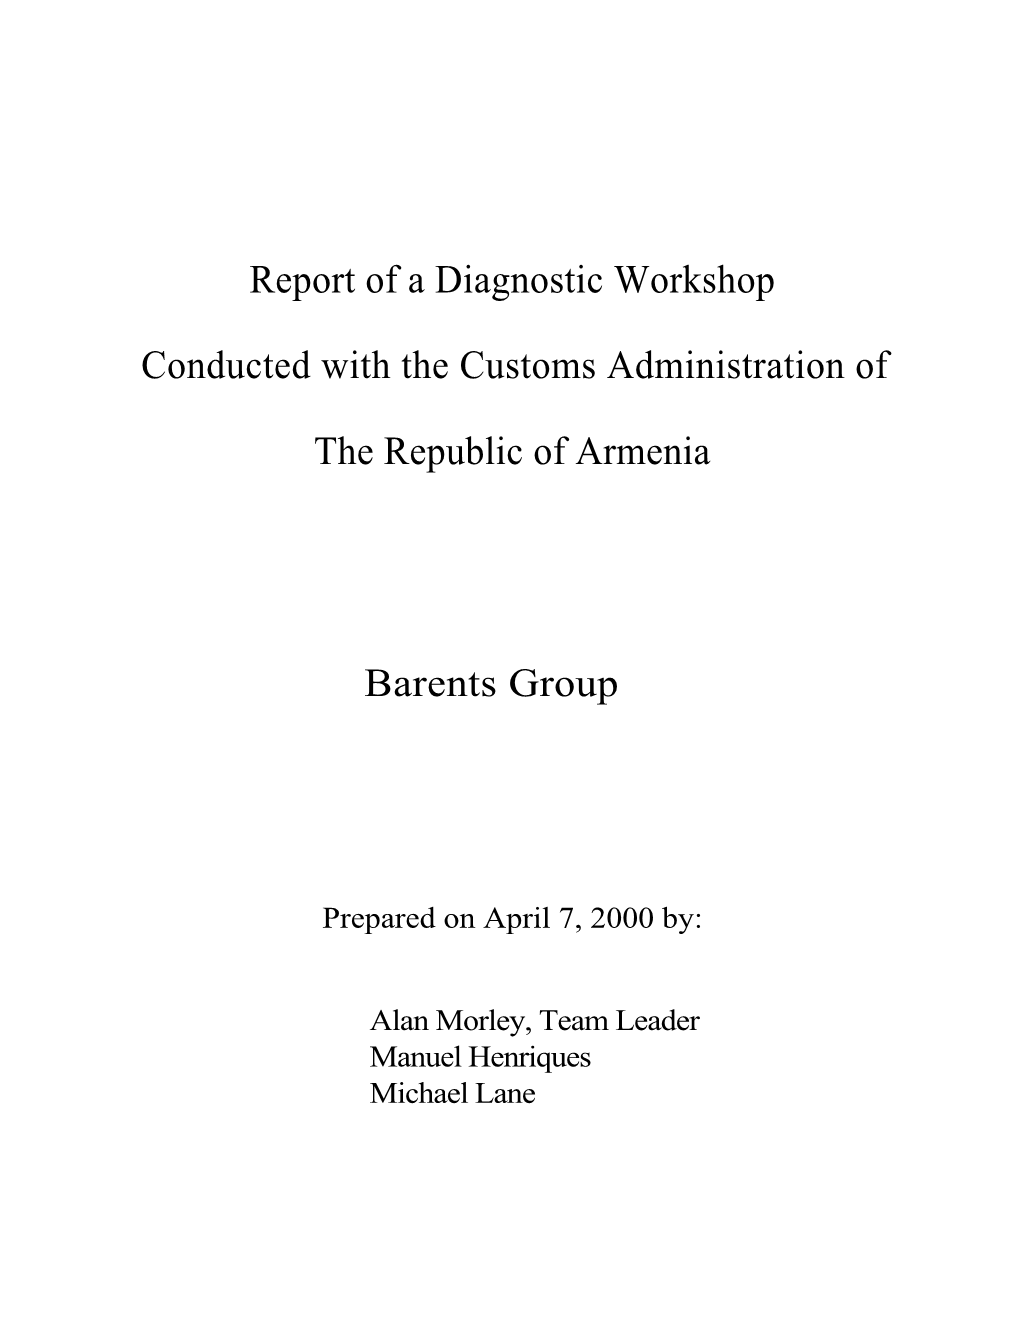 Report of a Diagnostic Workshop Conducted with the Customs Administration of the Republic of Armenia Barents Group